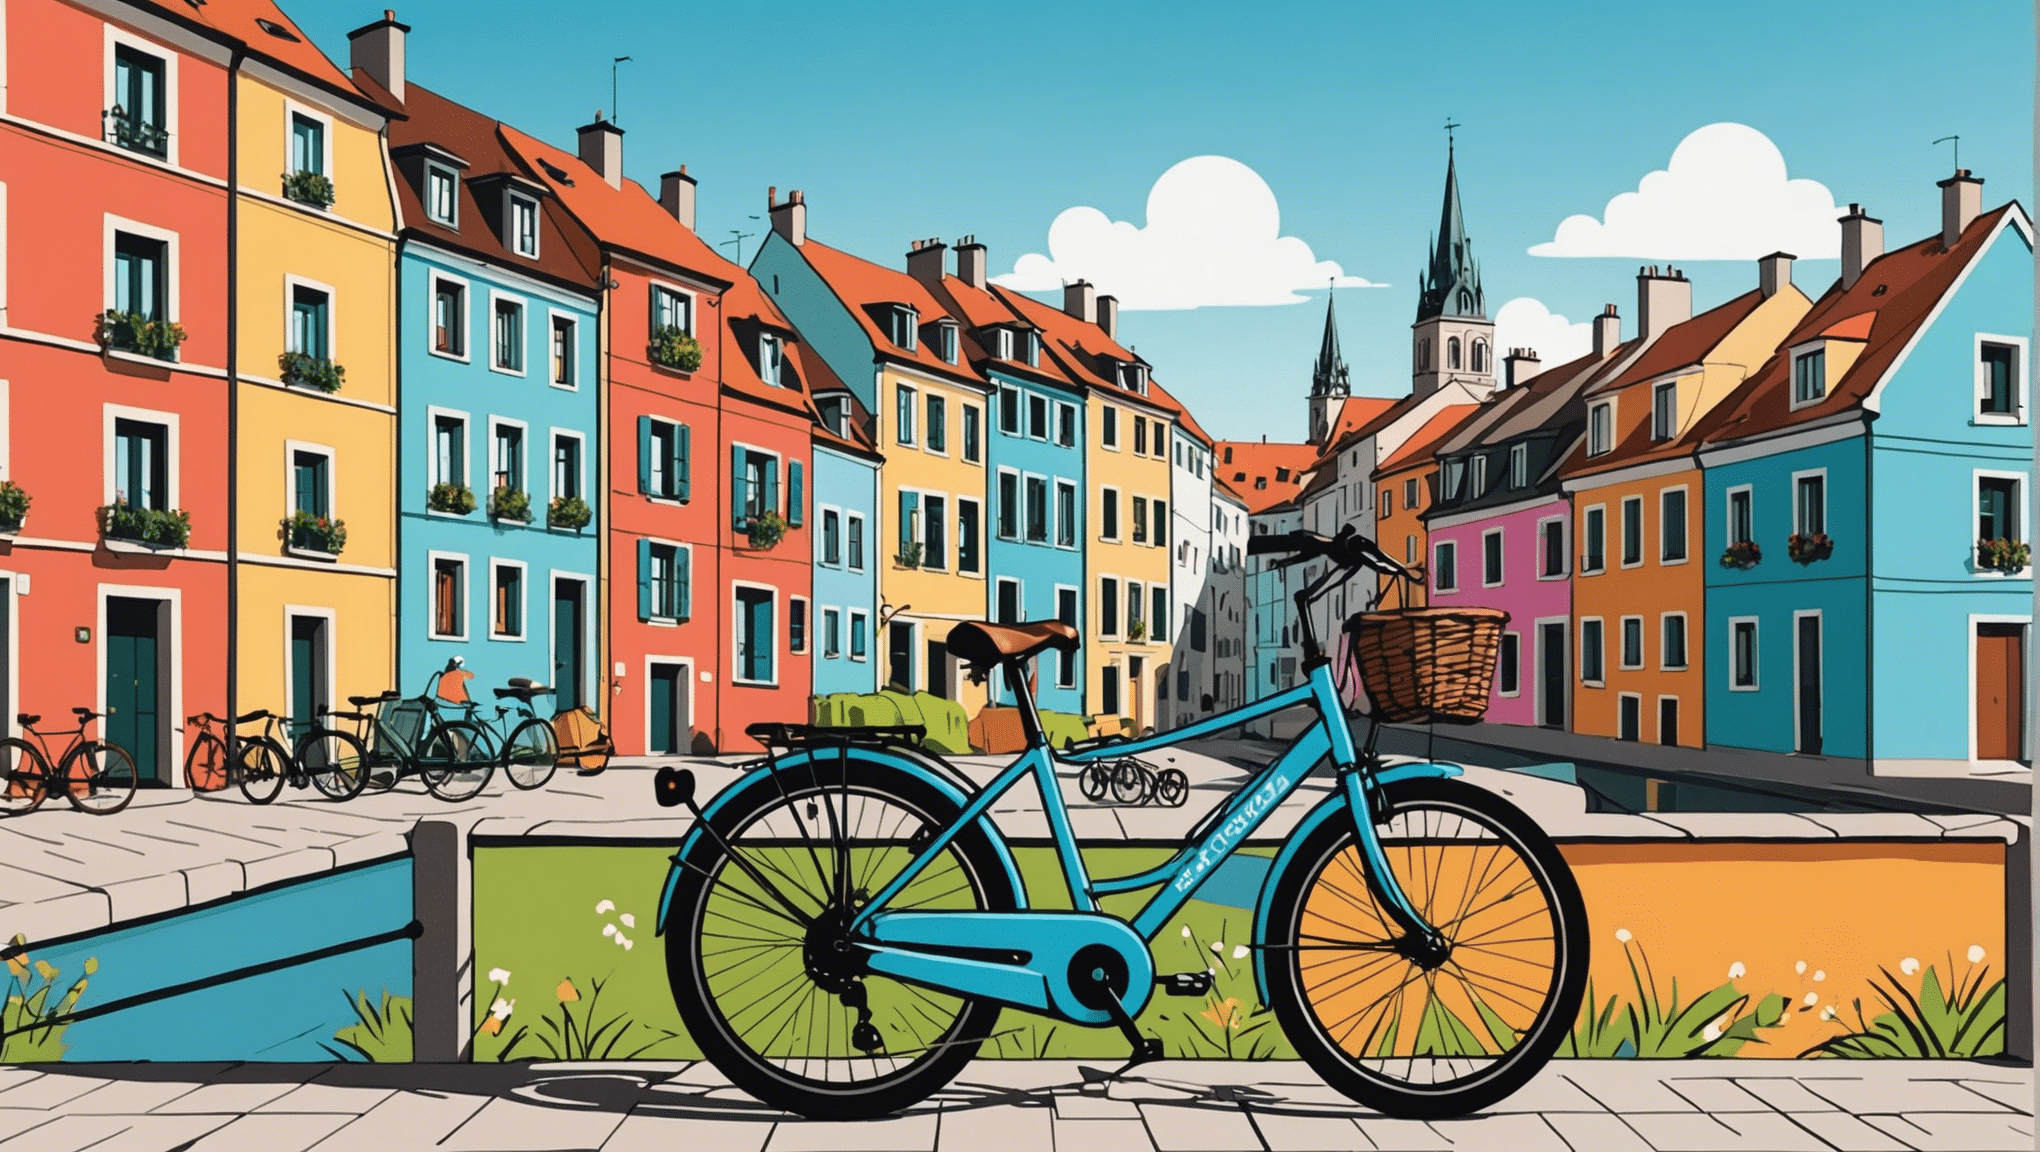 discover the must-see destinations for cycling travel enthusiasts in europe with our tips for exploring the continent on two wheels.